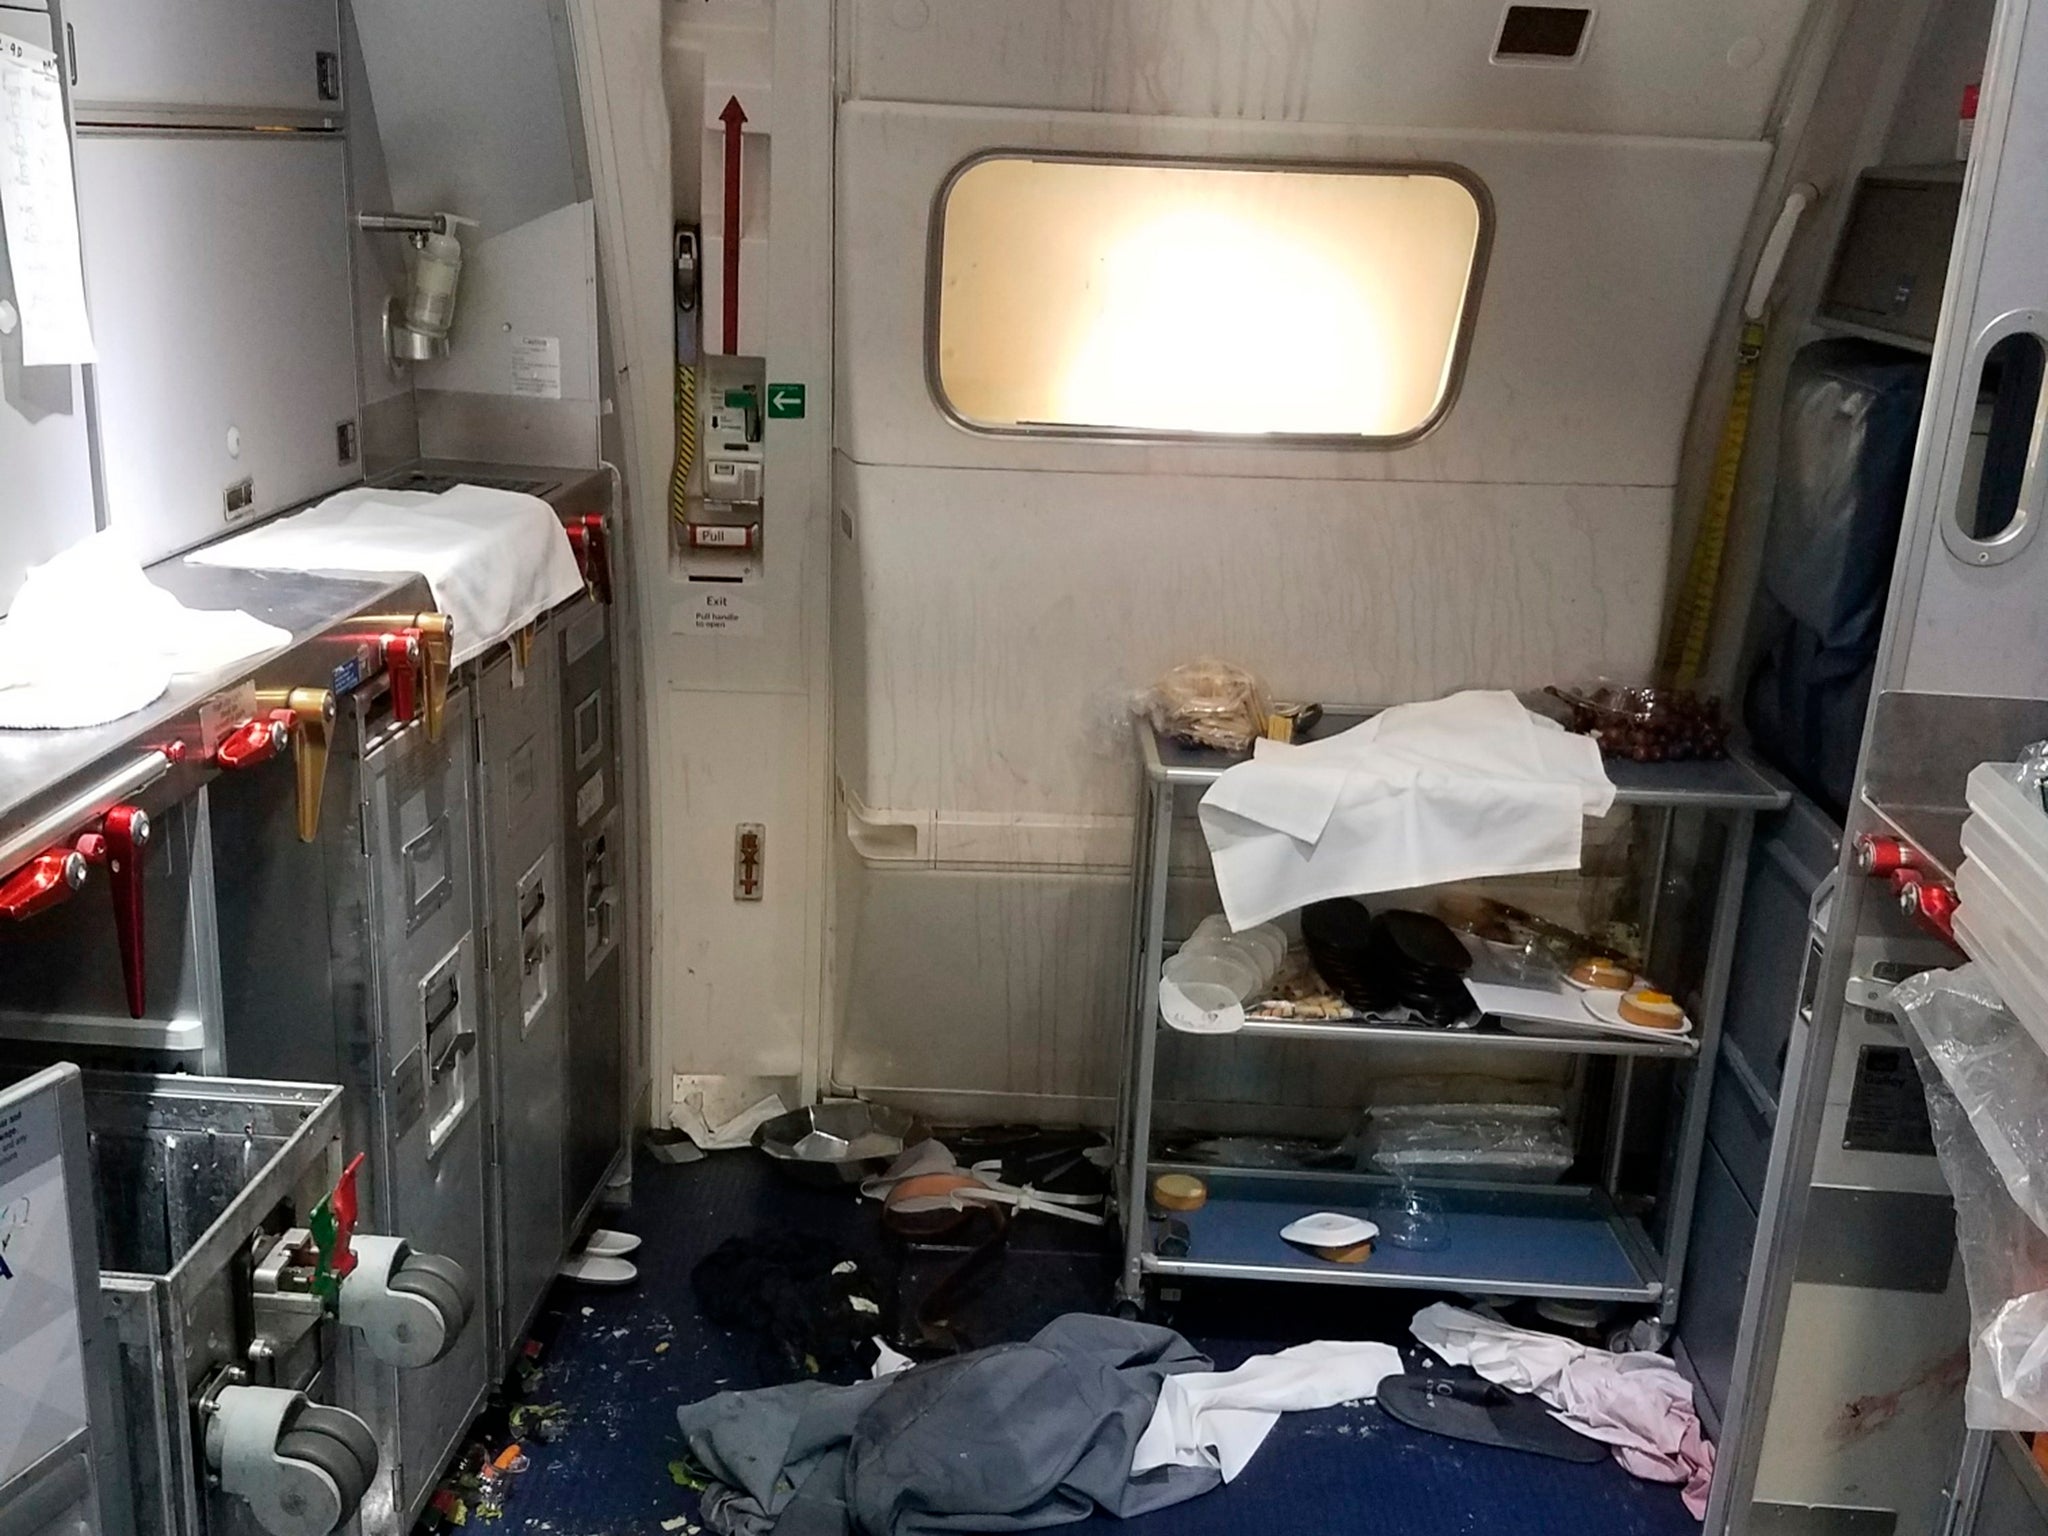 The aftermath of the incident on Delta Flight 129 from Seattle to Beijing